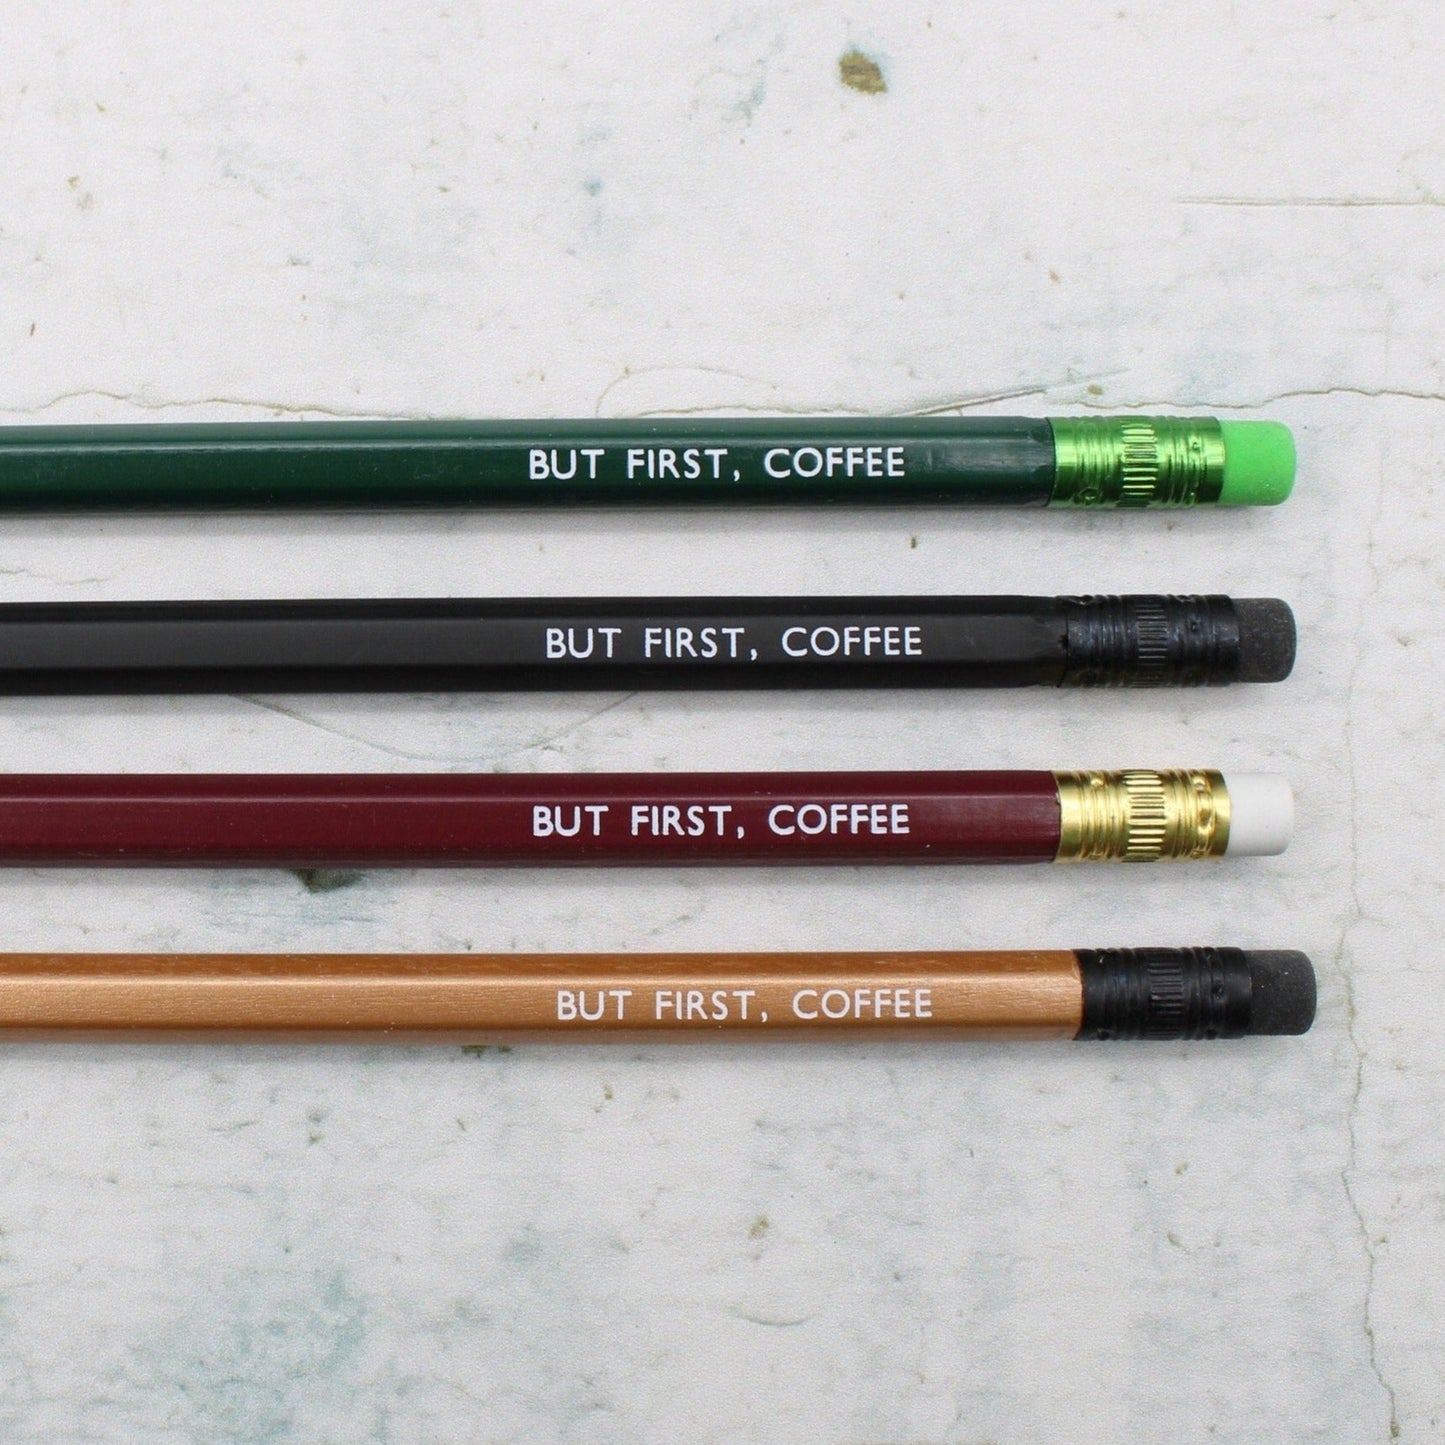 Printed Pencil - But First, Coffee